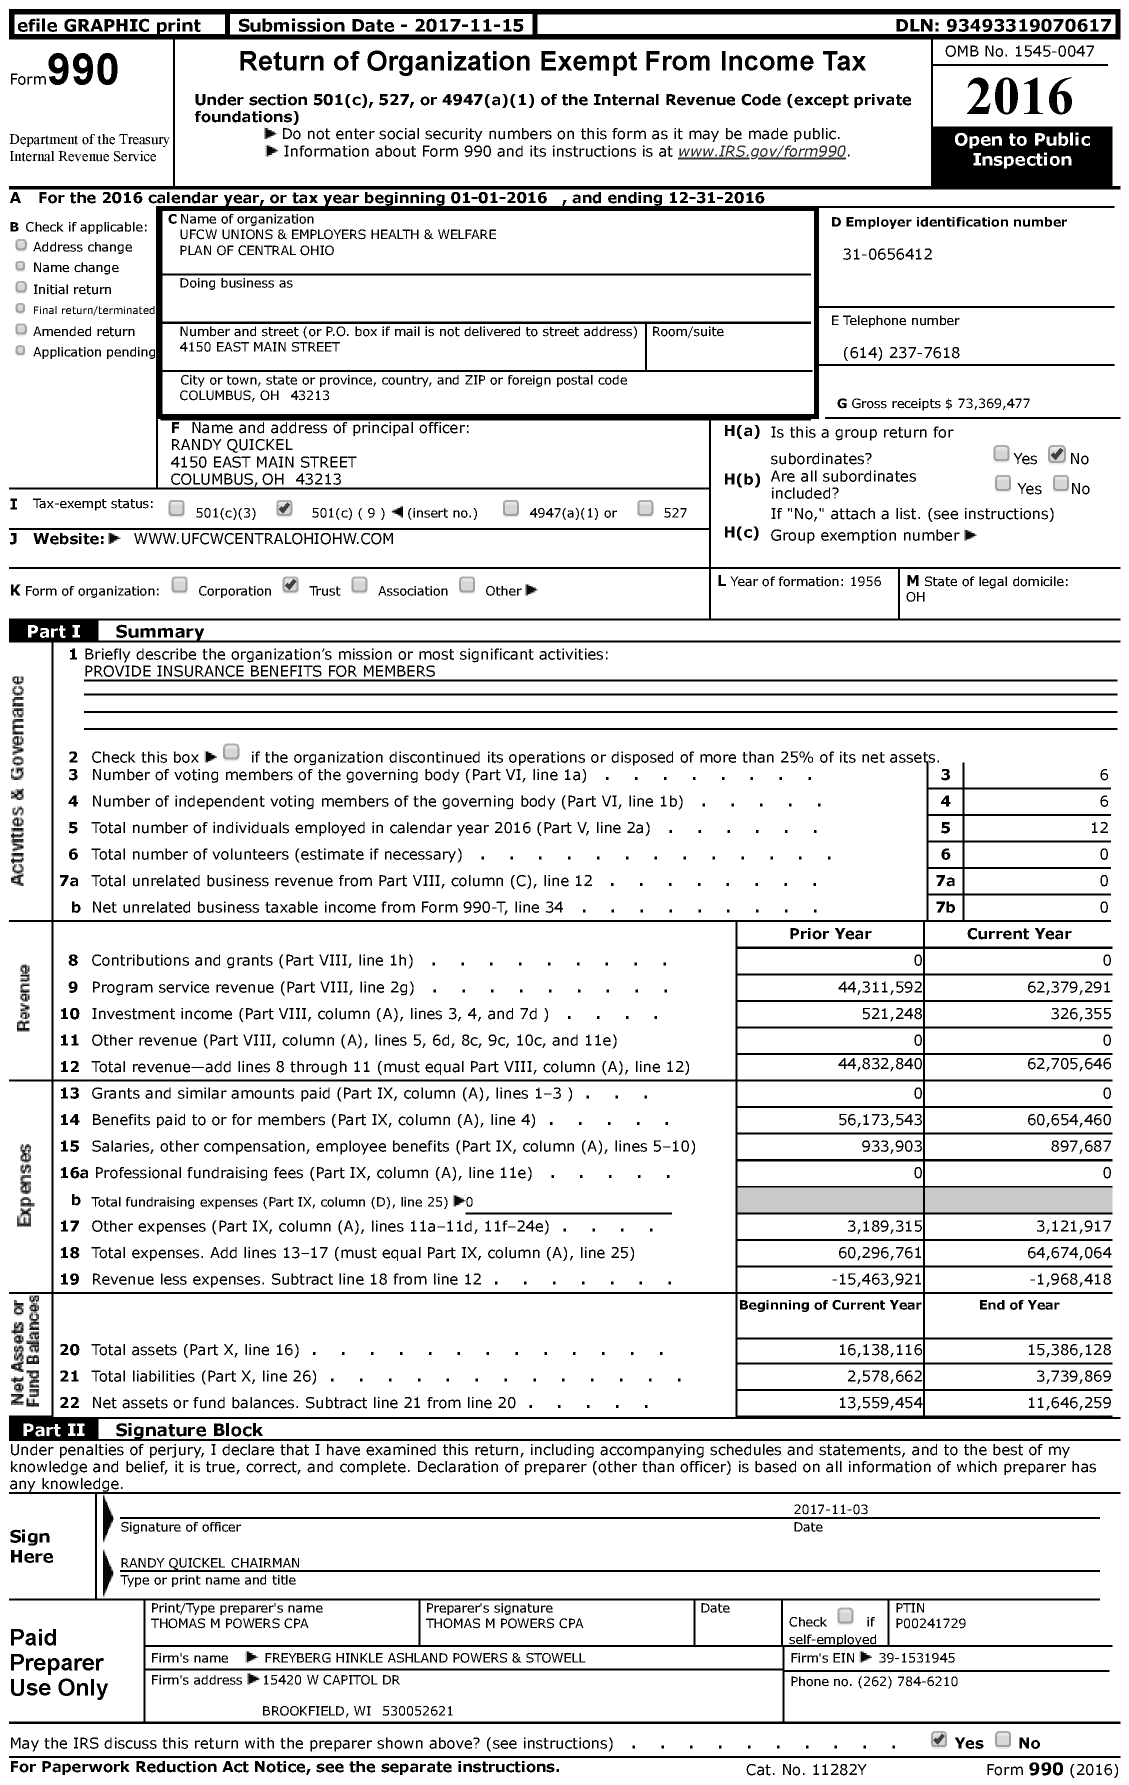 Image of first page of 2016 Form 990 for Ufcw Unions and Employers Health and Welfare Plan of Central Ohio